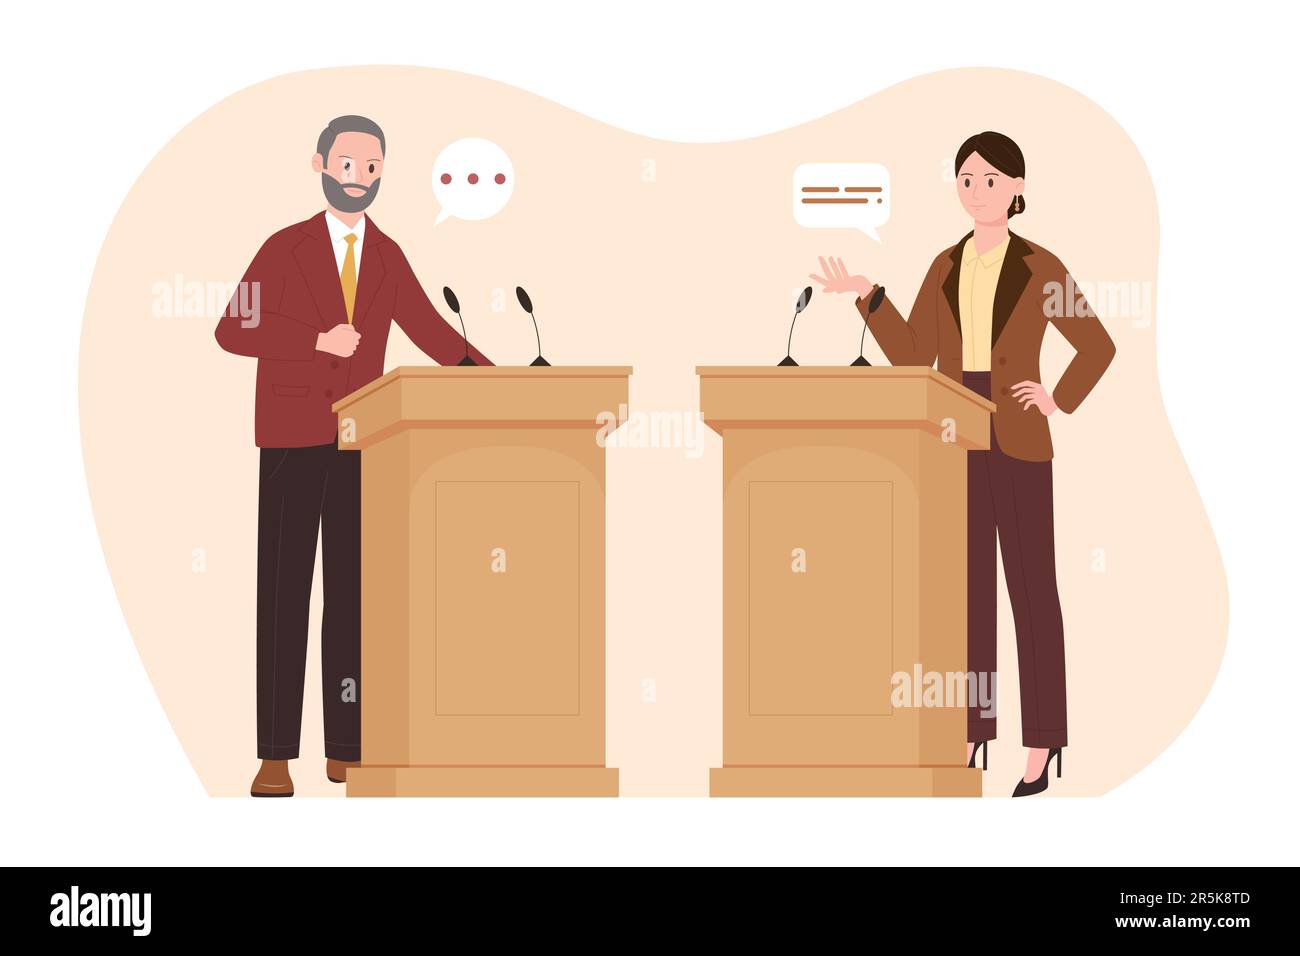 Political debates between two politicians and leaders at podiums vector illustration. Cartoon man and woman stand at tribunes on public meeting, candidates talk arguments in polemic conversation Stock Vector